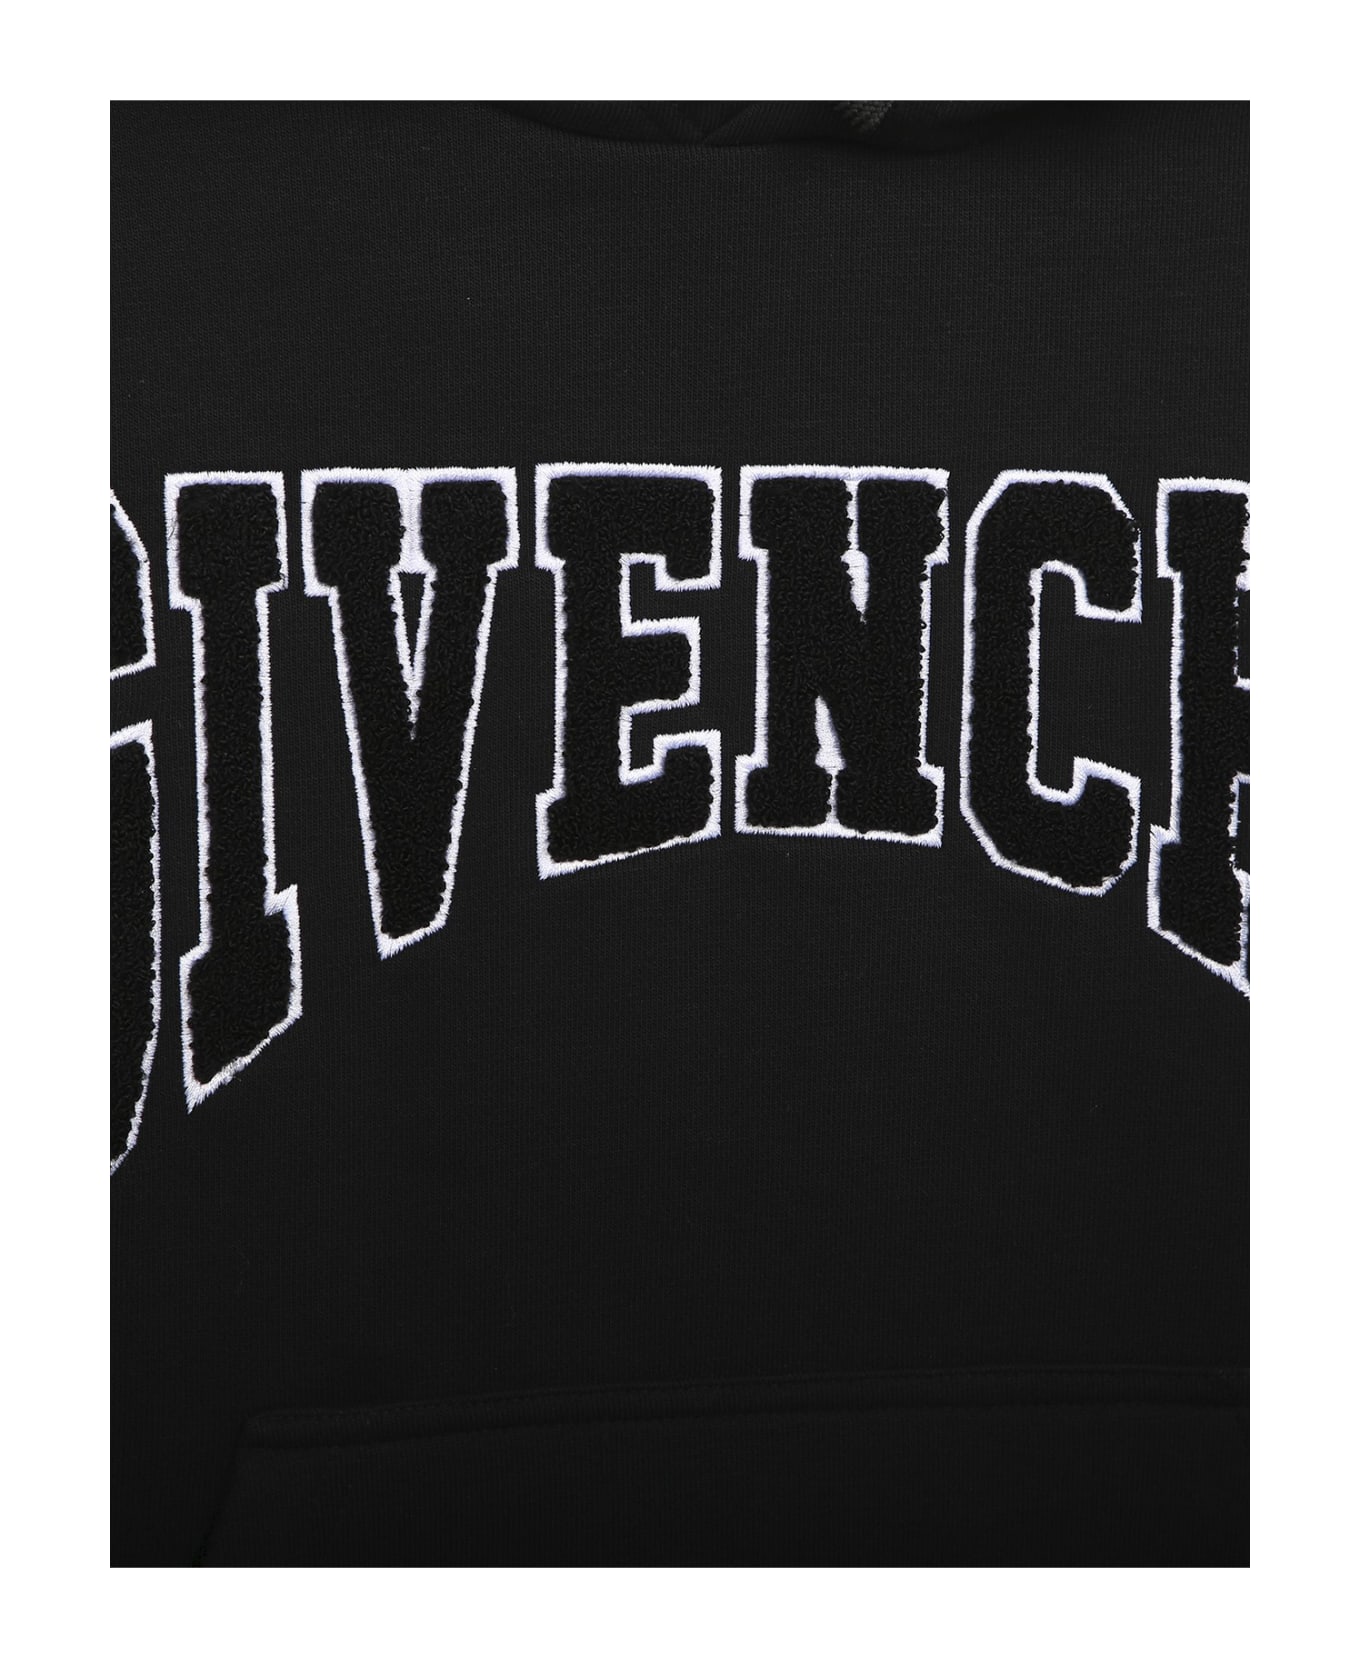 Givenchy Black Hoodie With Embroidered Logo - Nero